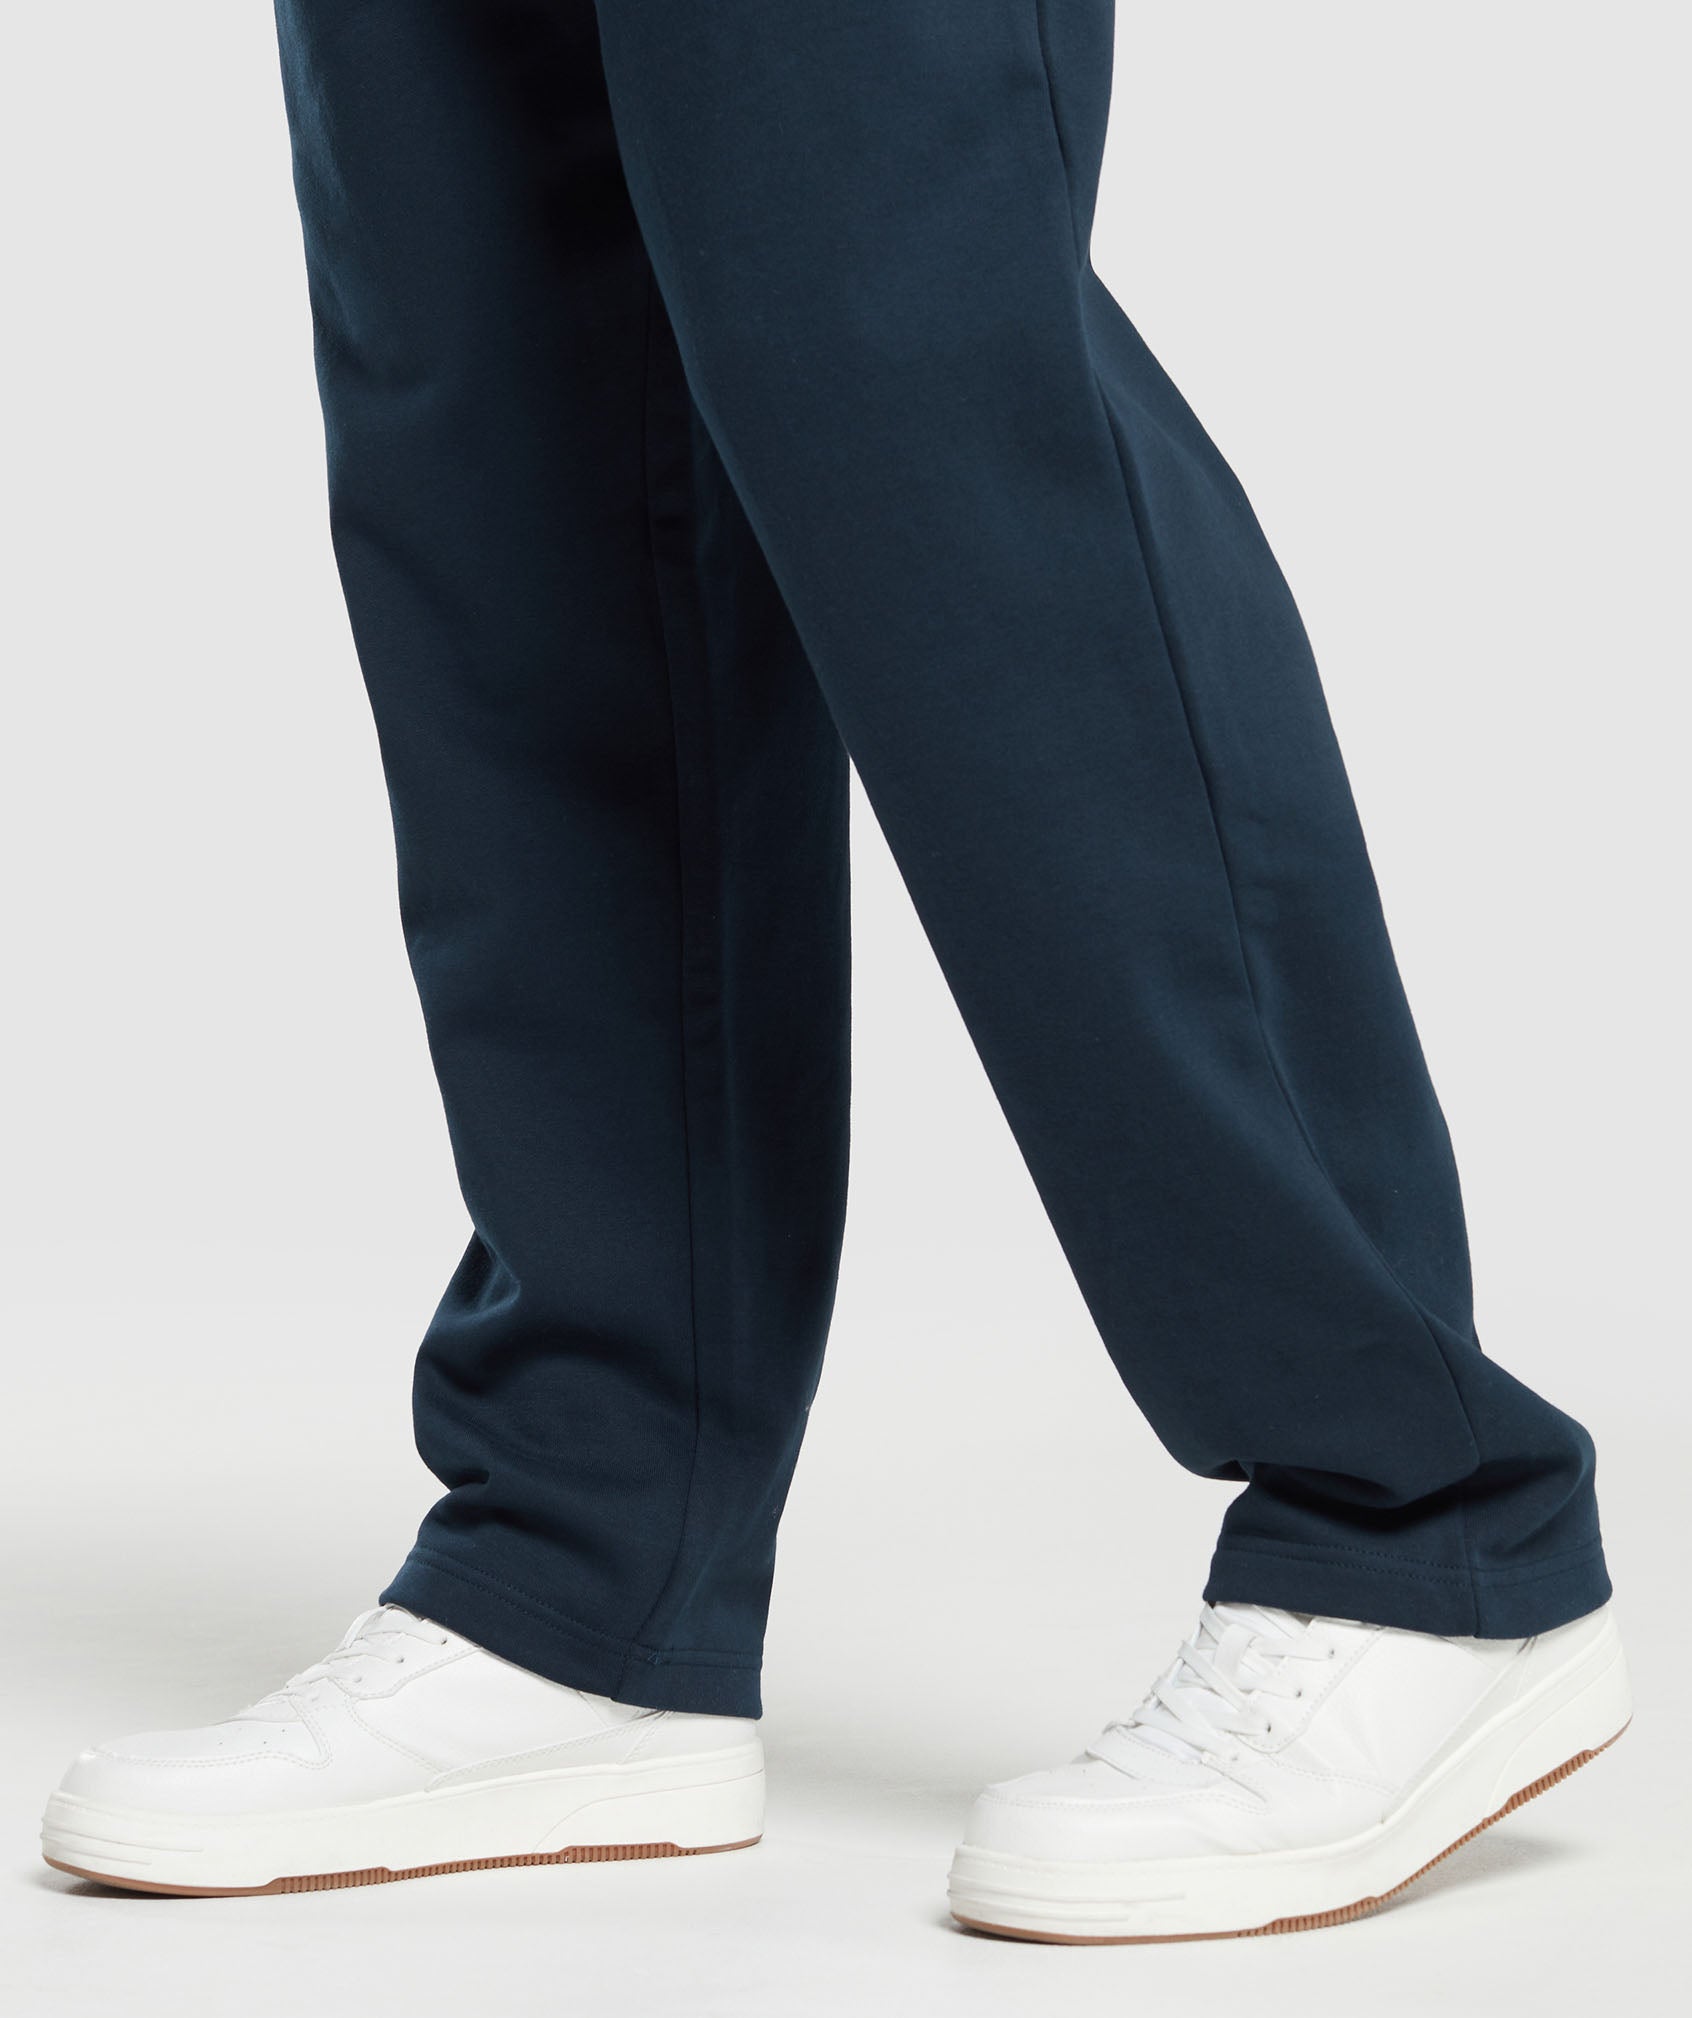 Crest Straight Leg Joggers in Navy - view 7